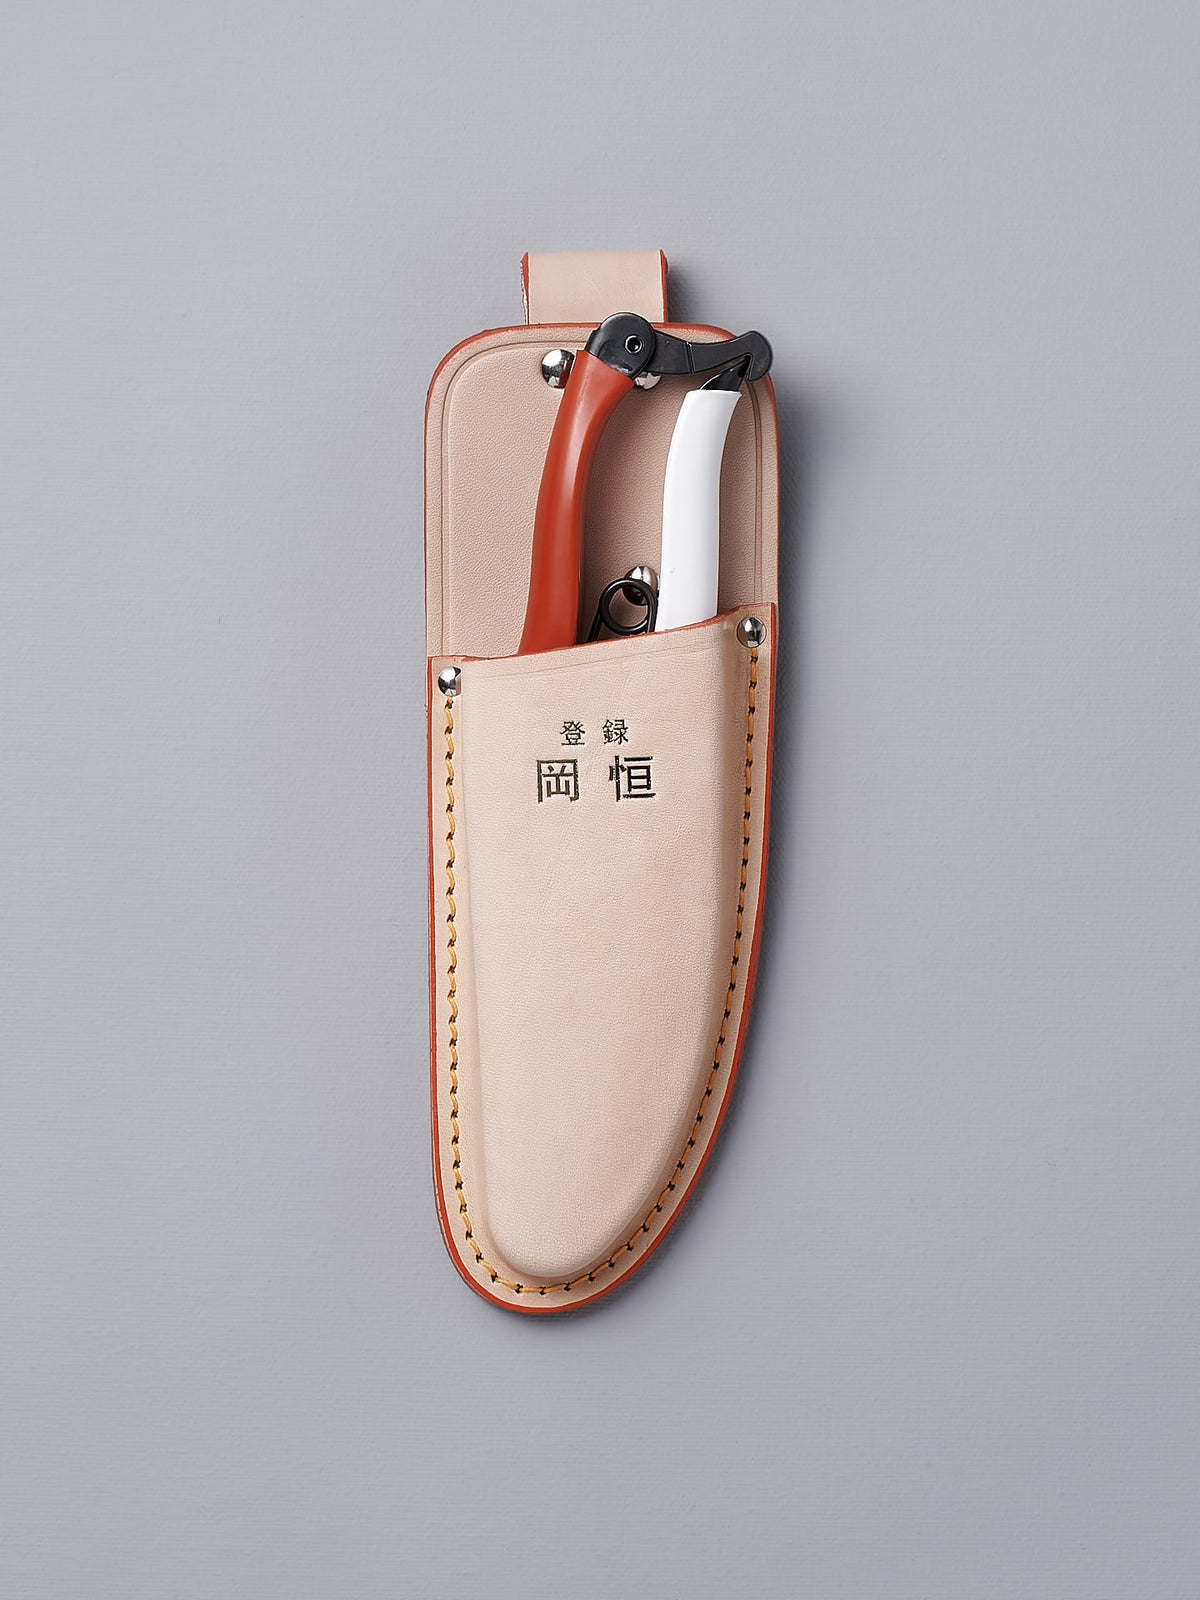 An Okatsune leather case with a pair of Japanese Secateurs №103 in it.